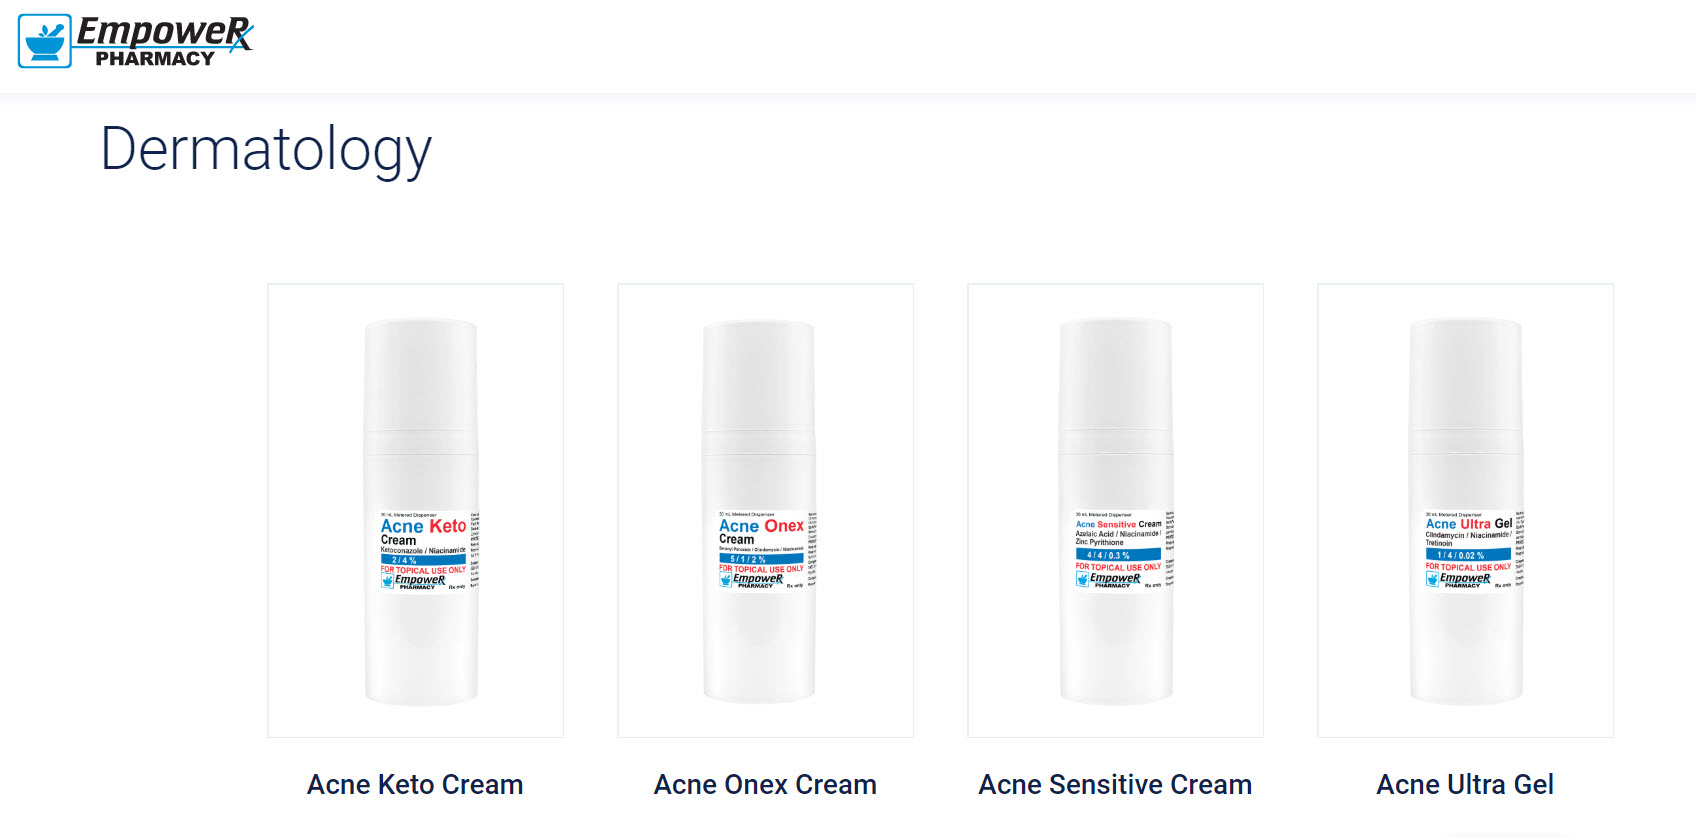 empower pharmacy acne products.jpg